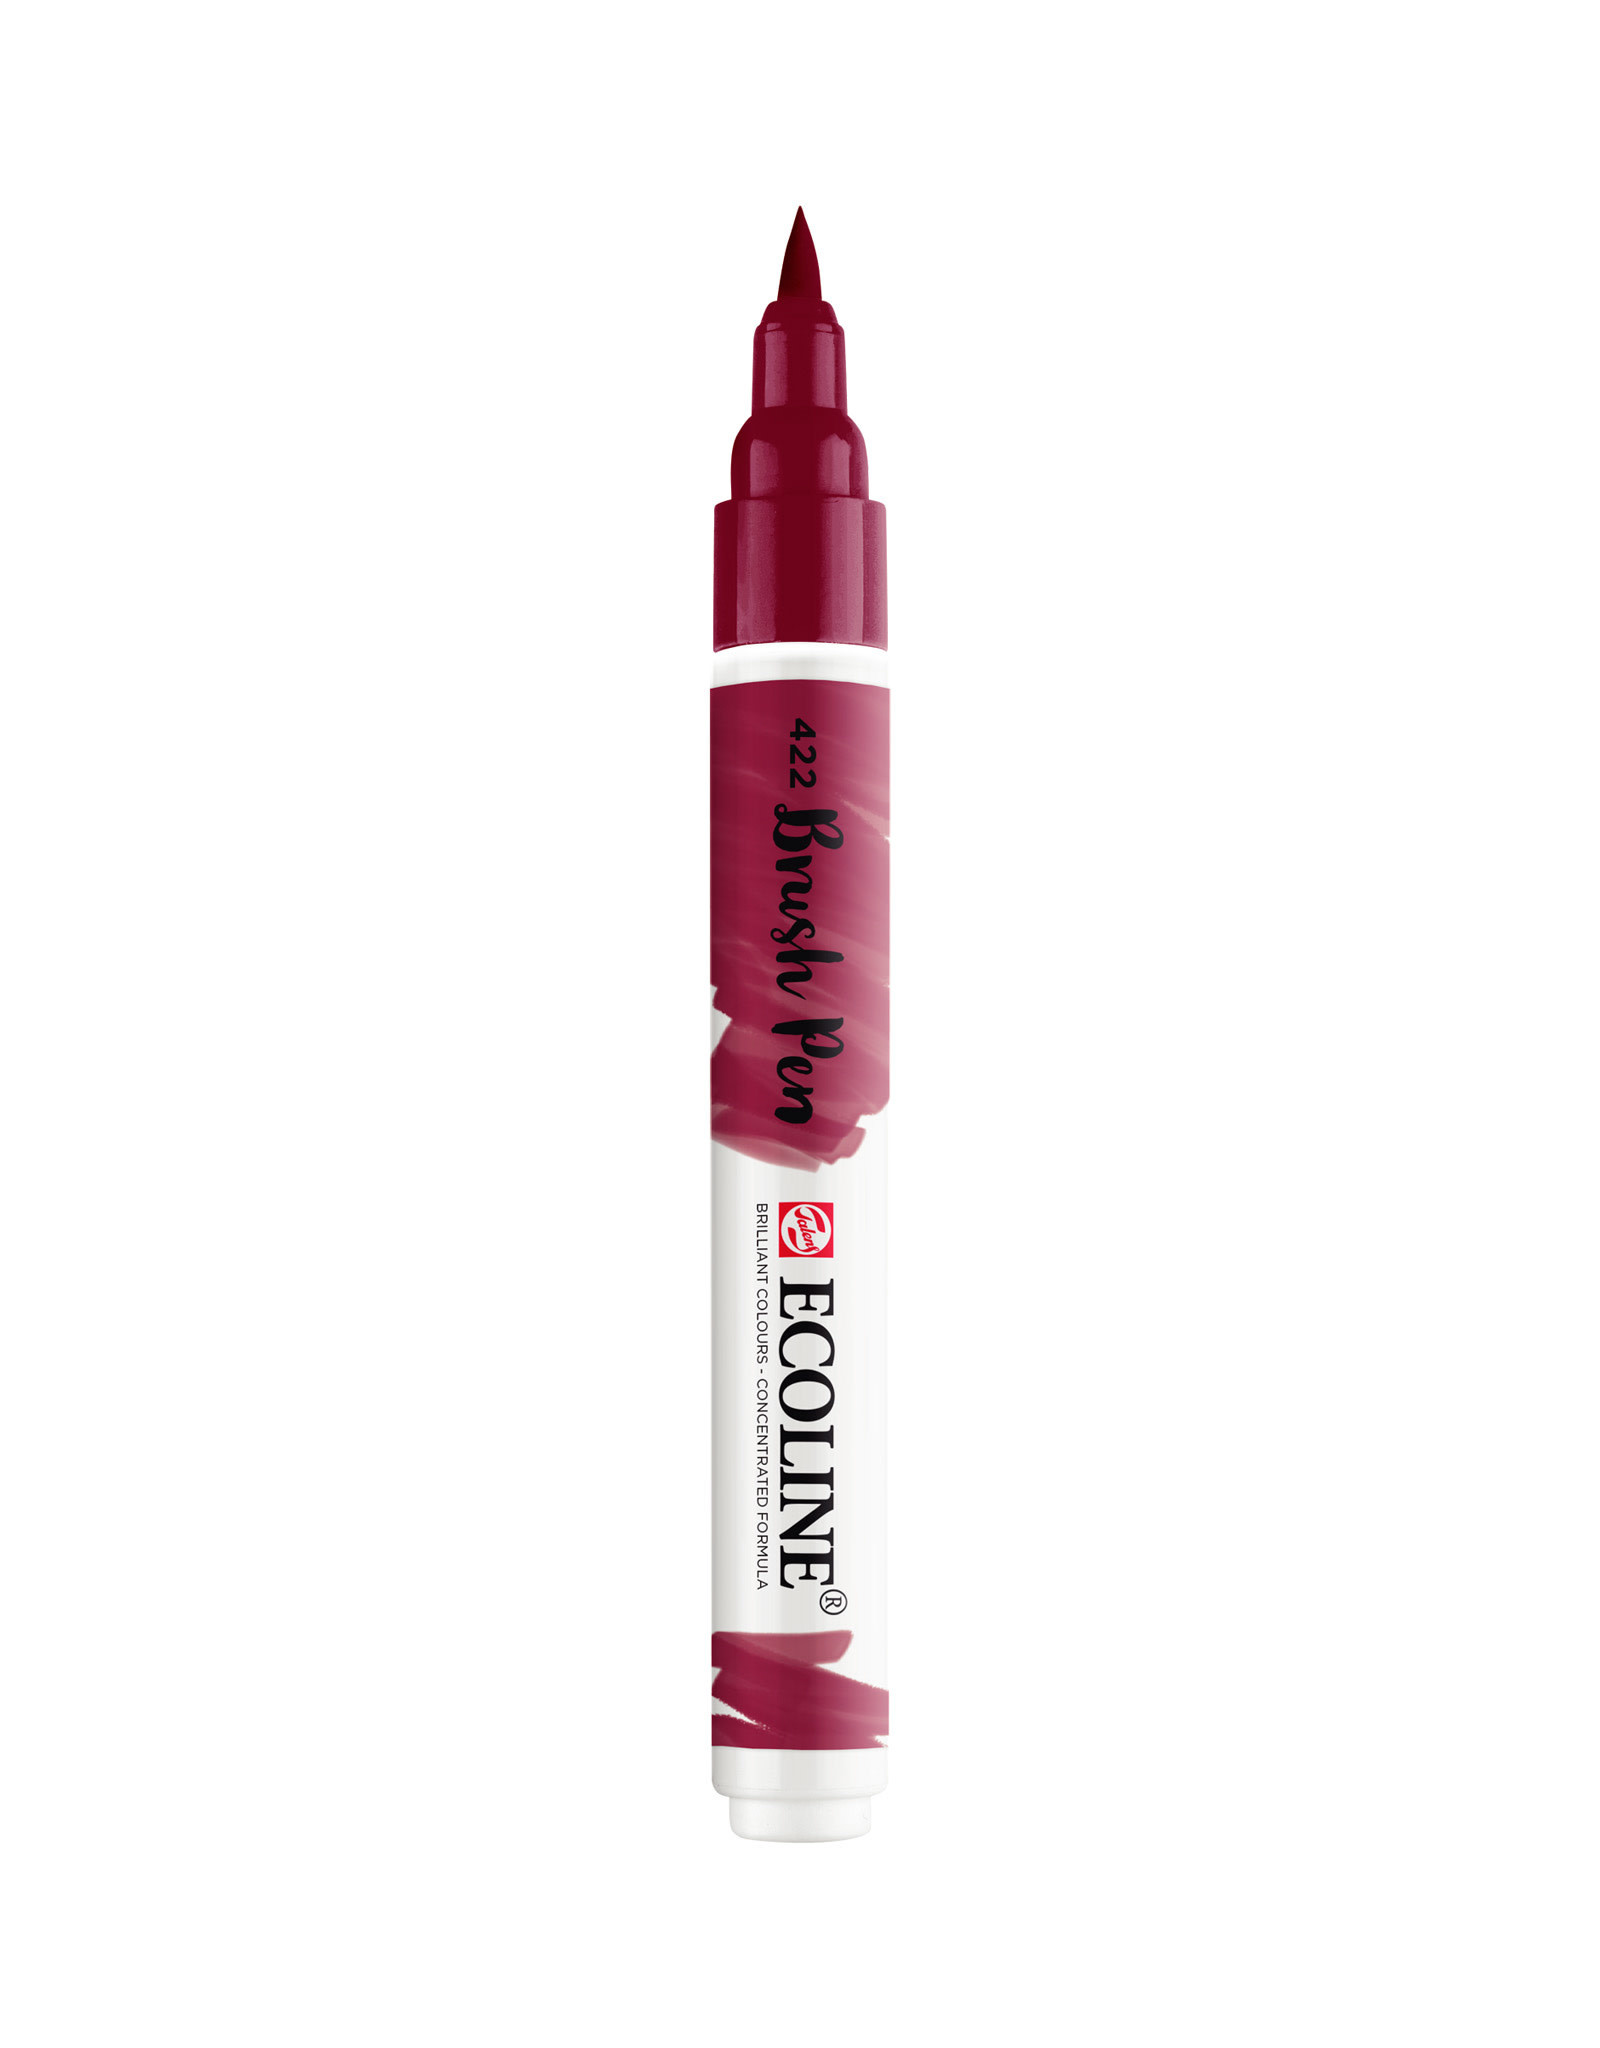 Royal Talens Ecoline Watercolour Brush Pen, Red Brown